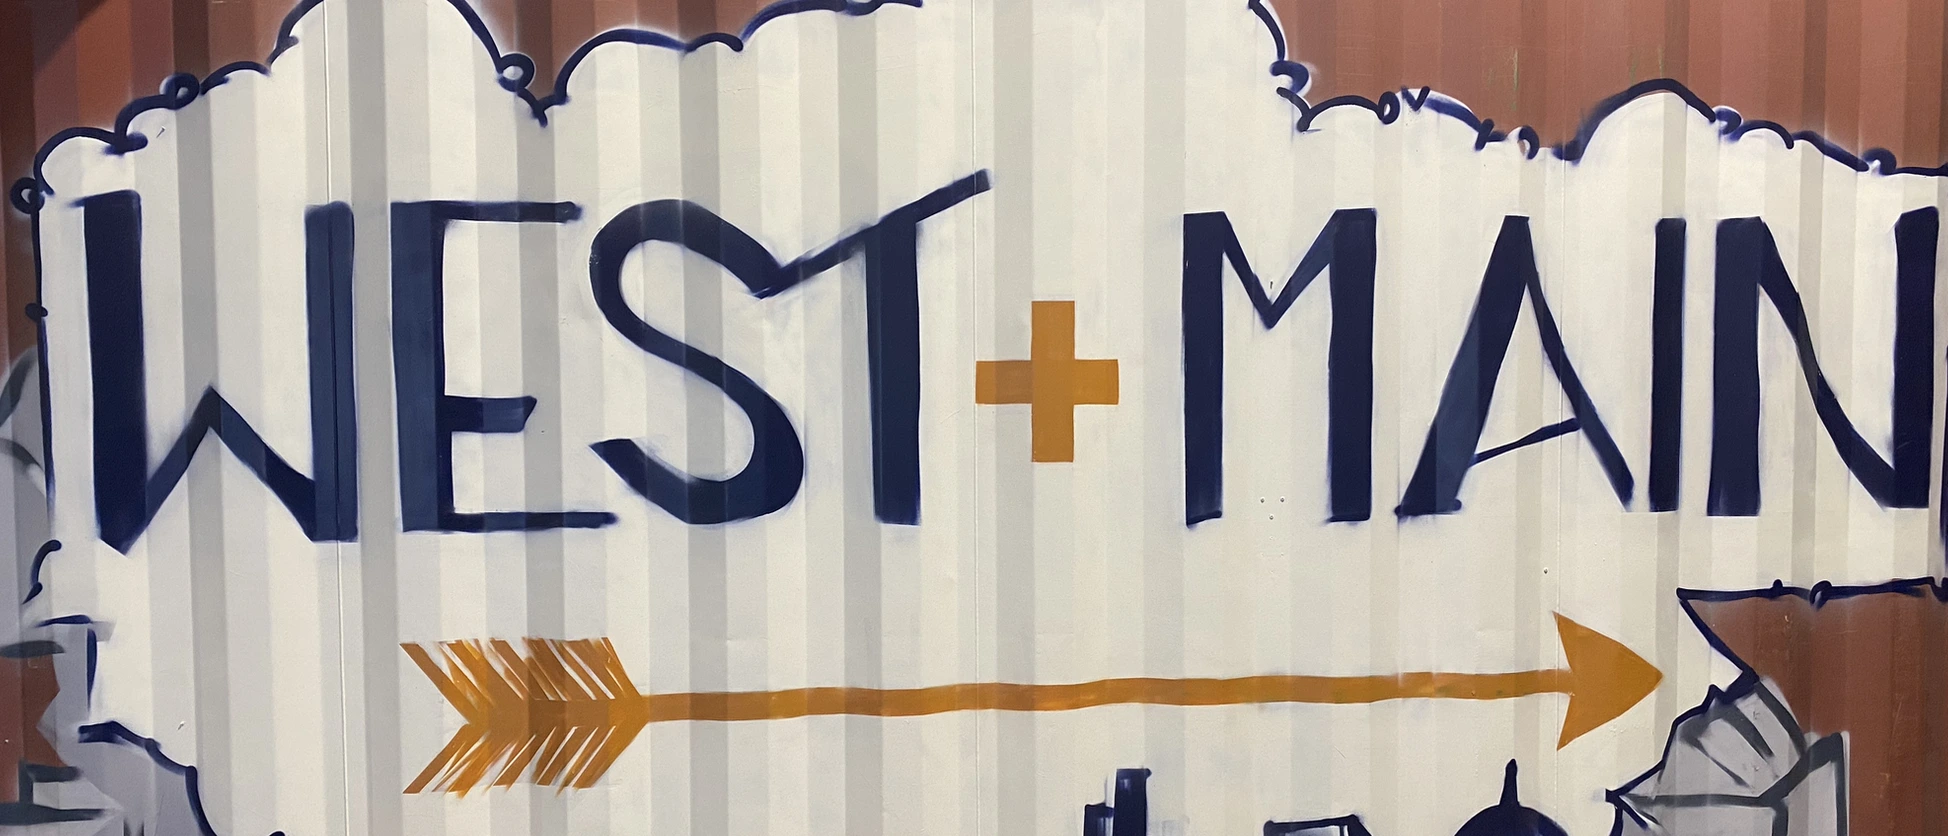 West+Main logo on the wall